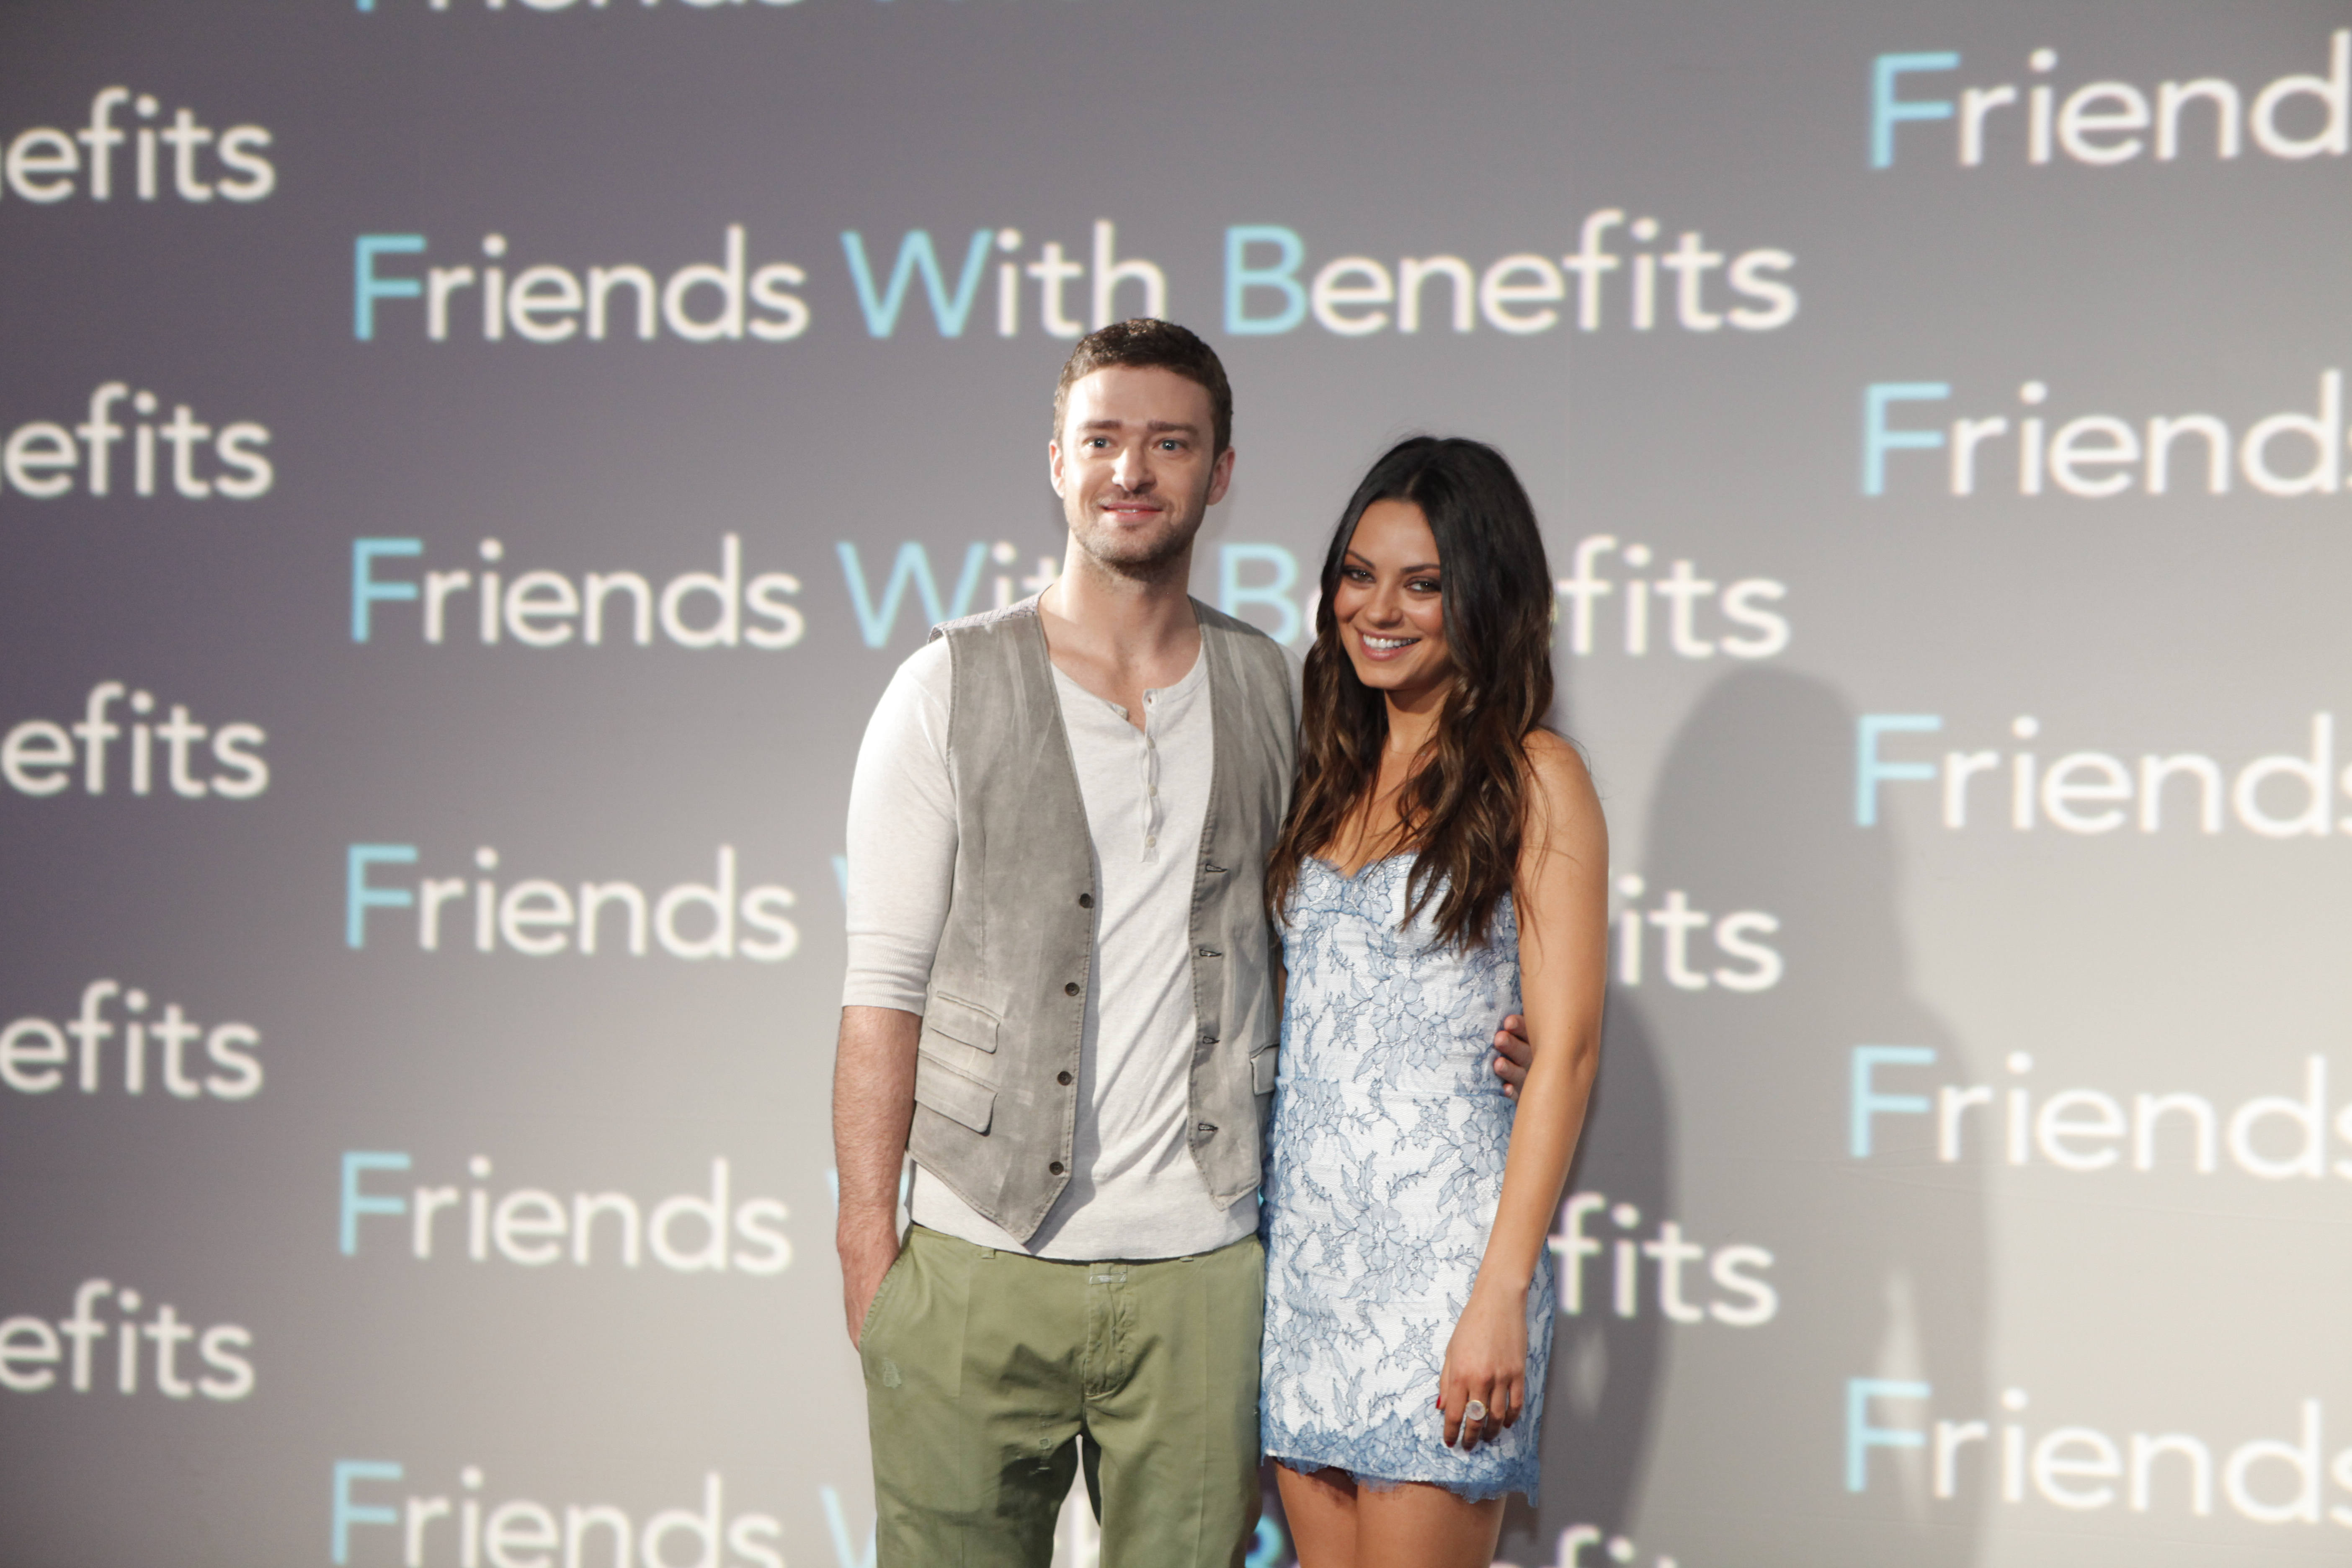 Justin Timberlake and Mila Kunis attend the "Friends With Benefits" photocall at "Summer of Sony 3" on July 13, 2011, in Cancun, Mexico. | Source: Getty Images